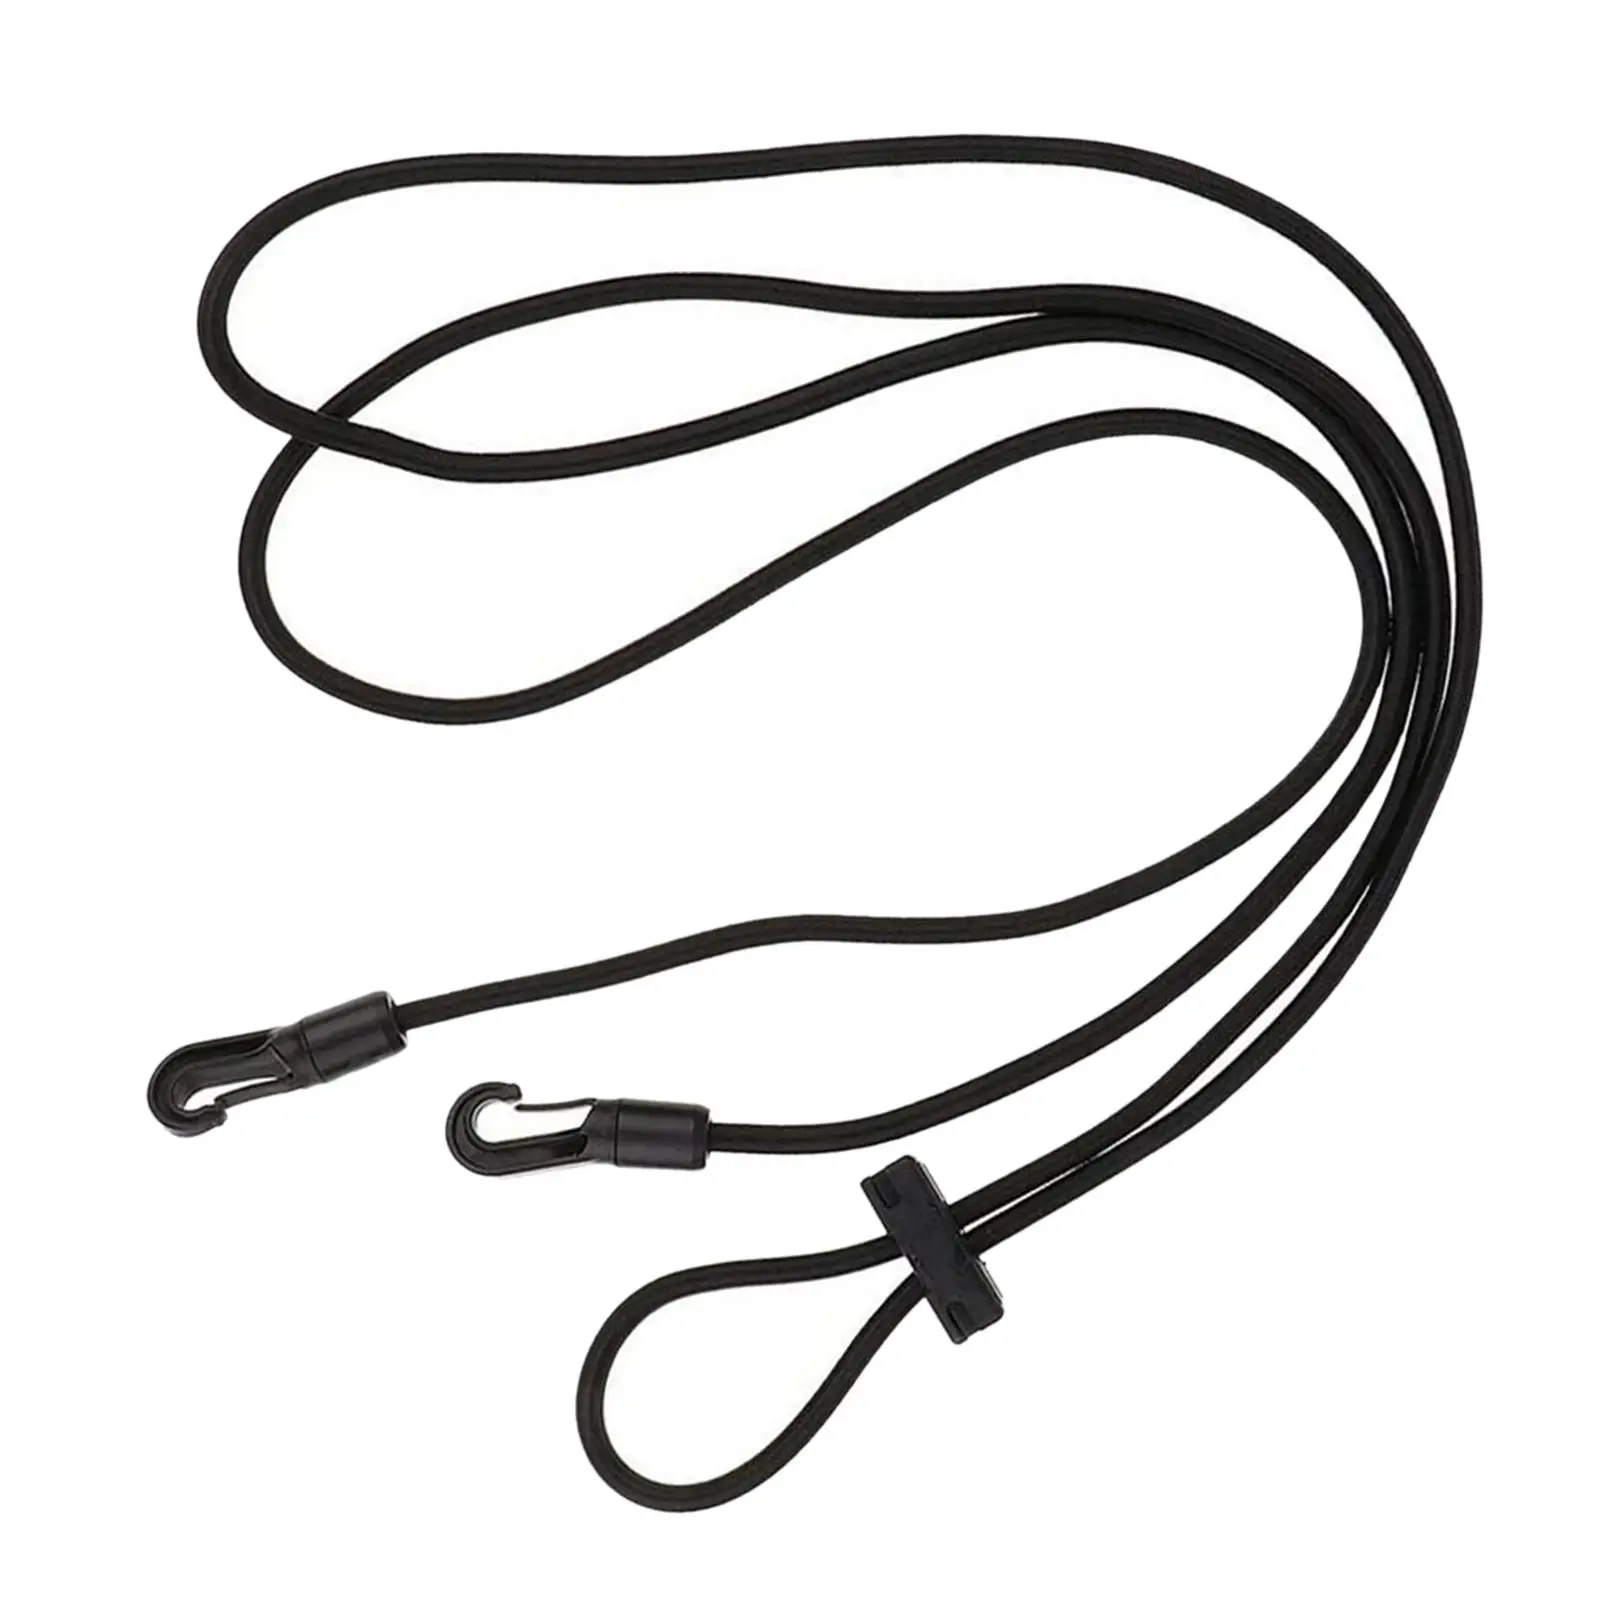 3M Horse Auxiliary Reins Training Rope Comfortable Pony Bridle Adjustable Neck Stretcher for Grooming Speed Racing Horse Riding